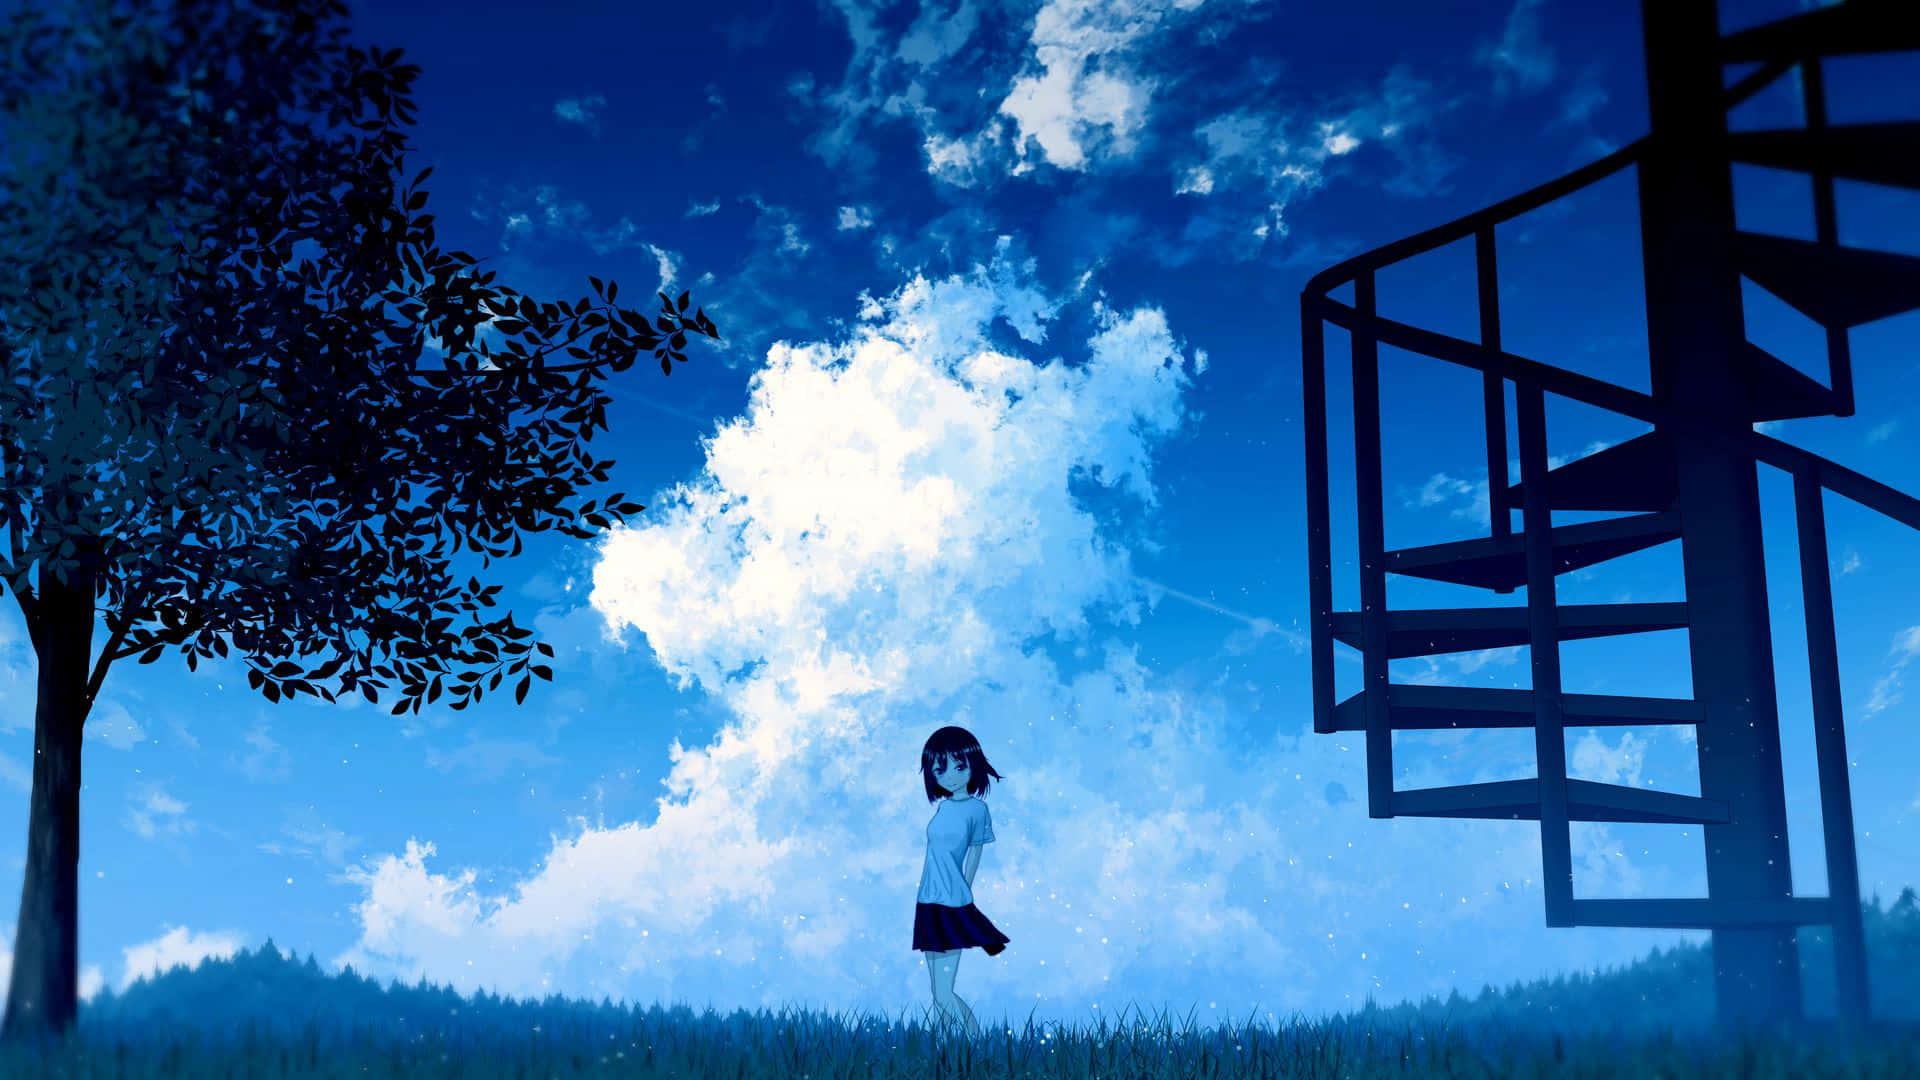 Get lost in the dreamy world of Anime Sky